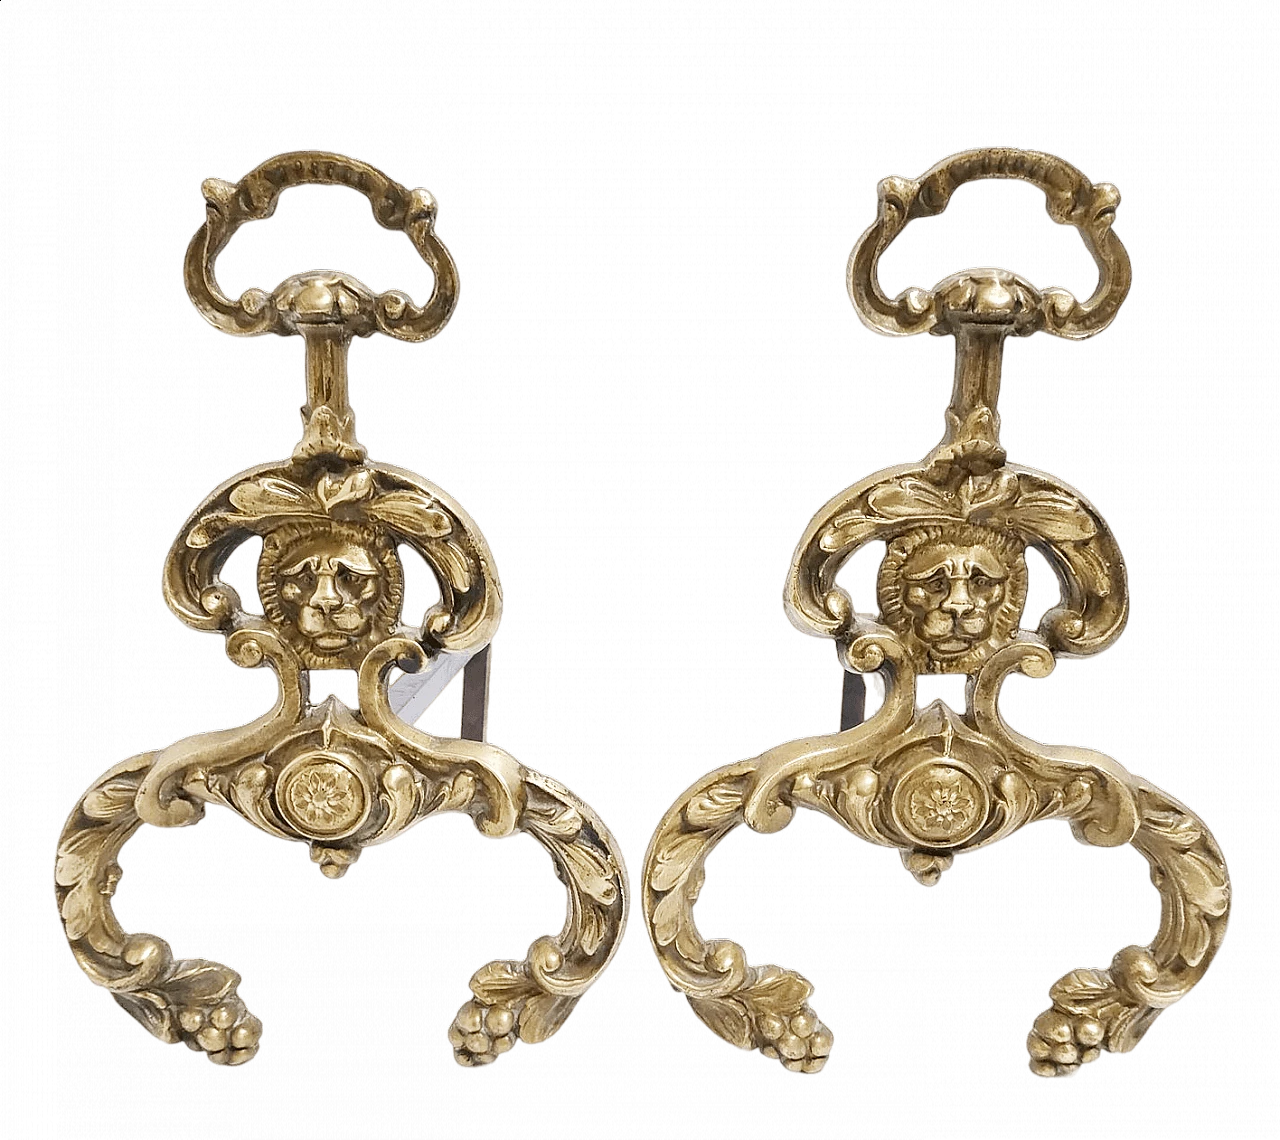 Pair of Renaissance-style chimney andirons, late 19th century 6